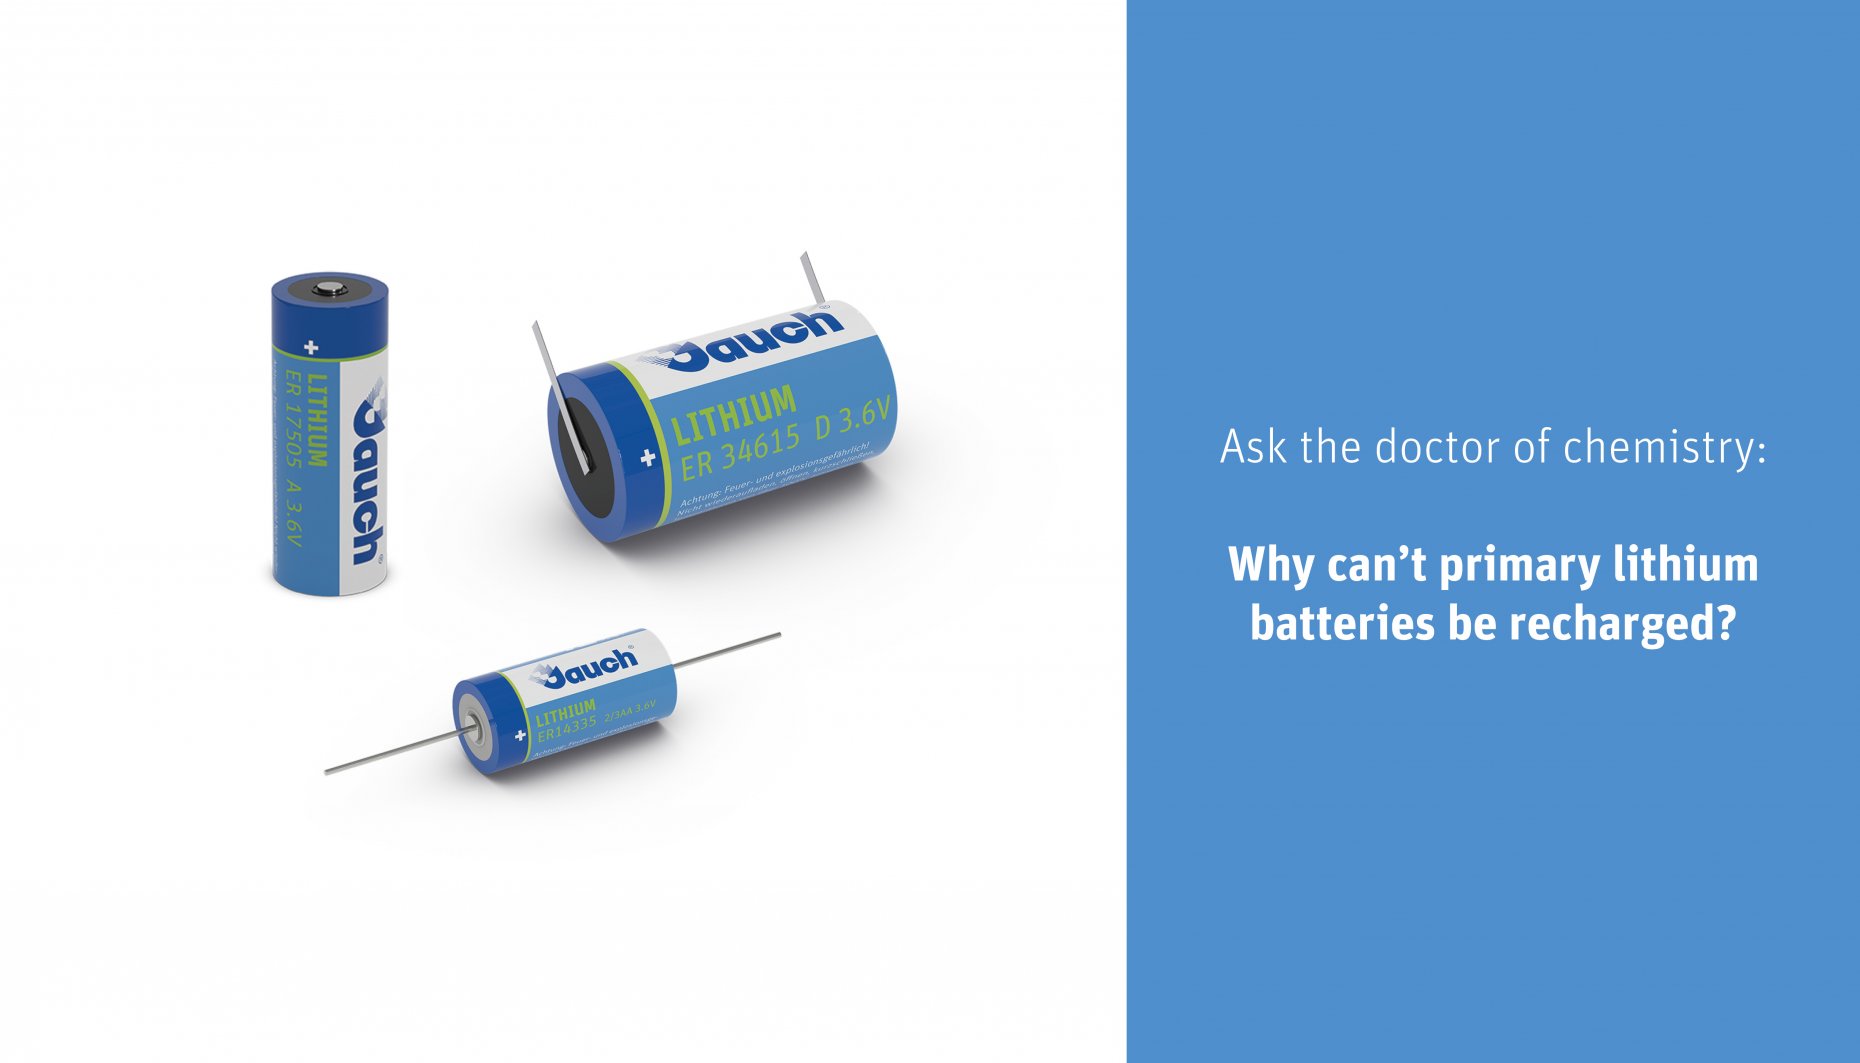 primary lithium batteries from Jauch and title of the article